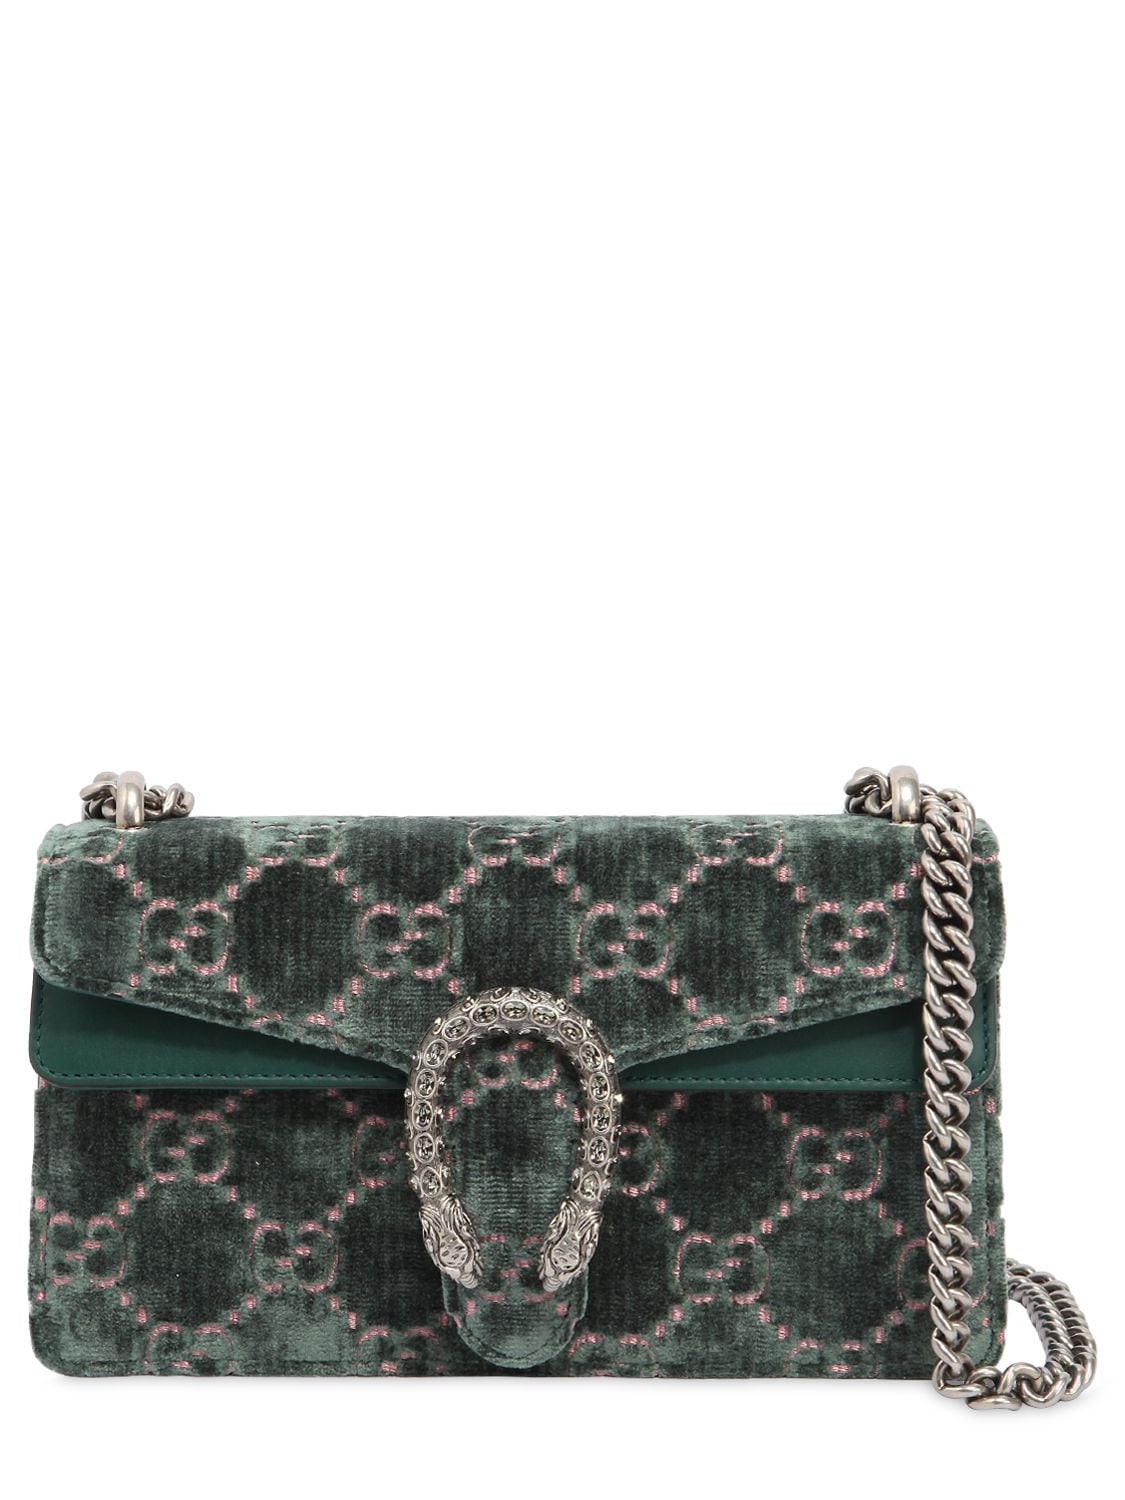 Gucci Small Dionysus Studded Leather Shoulder Bag In Black | ModeSens